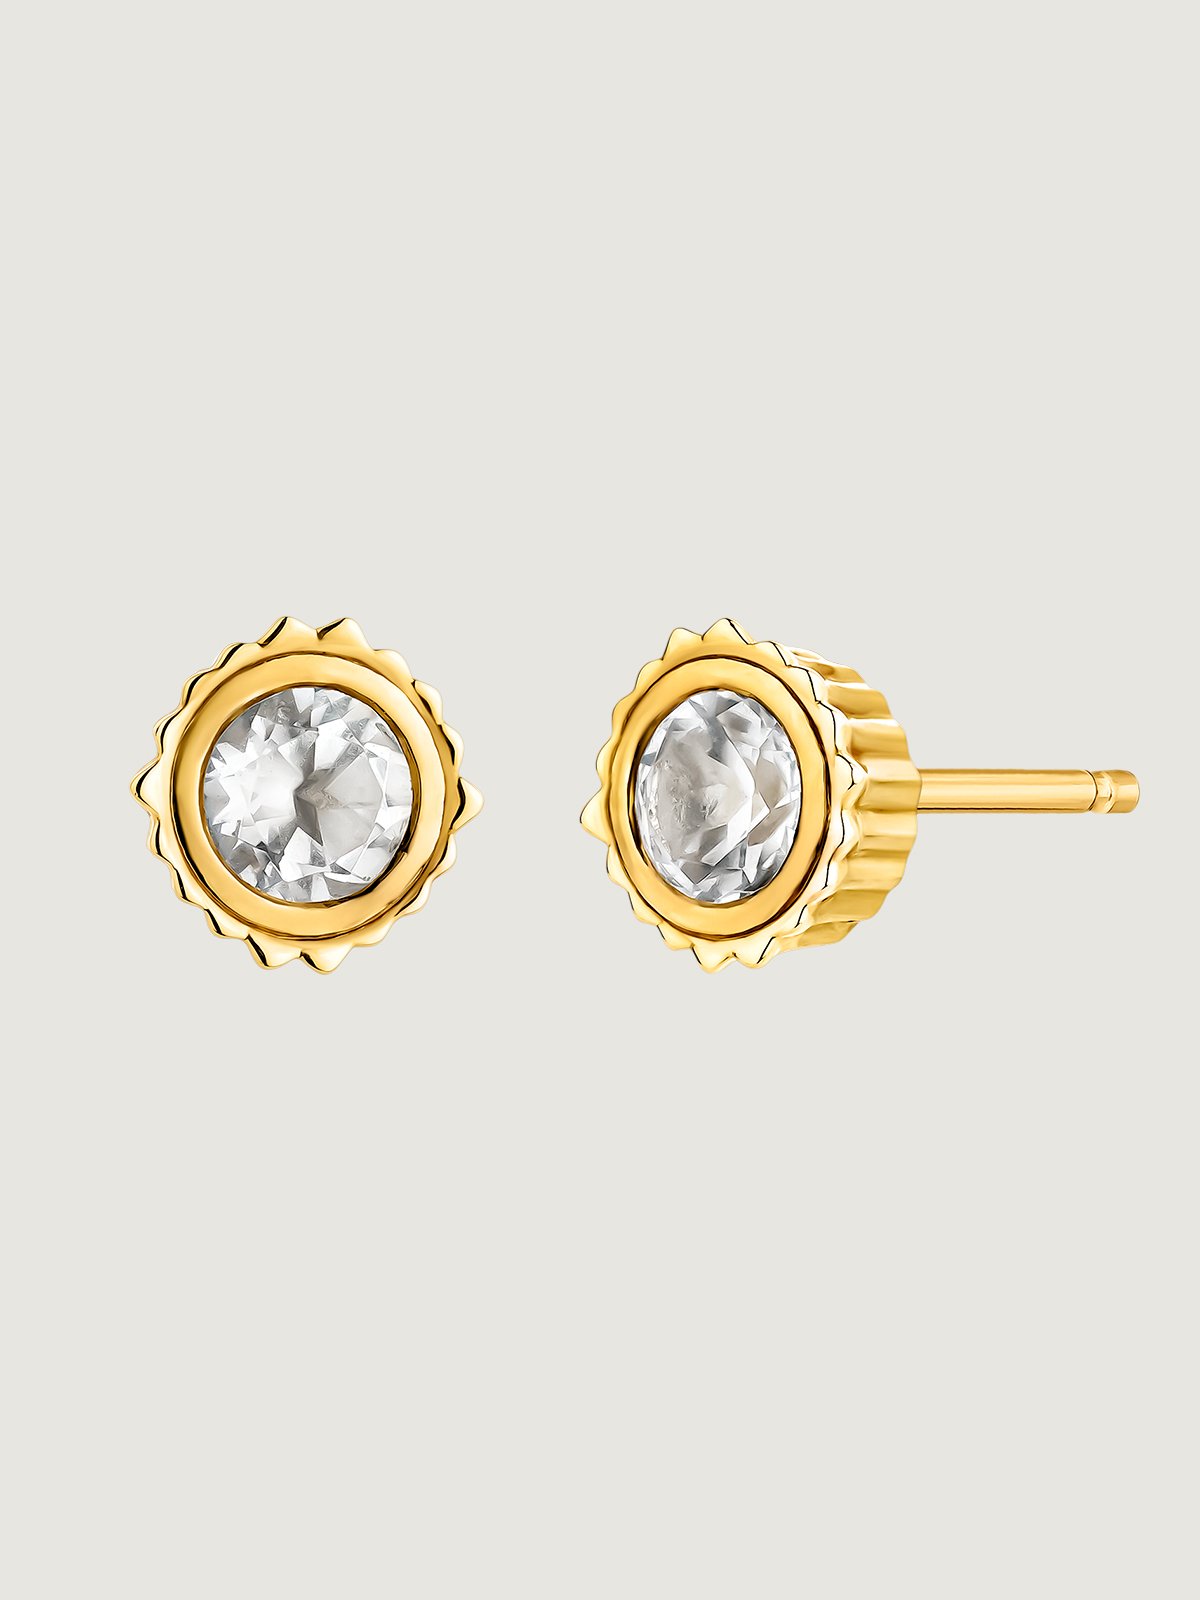 925 Silver earrings bathed in 18K yellow gold with white topaz